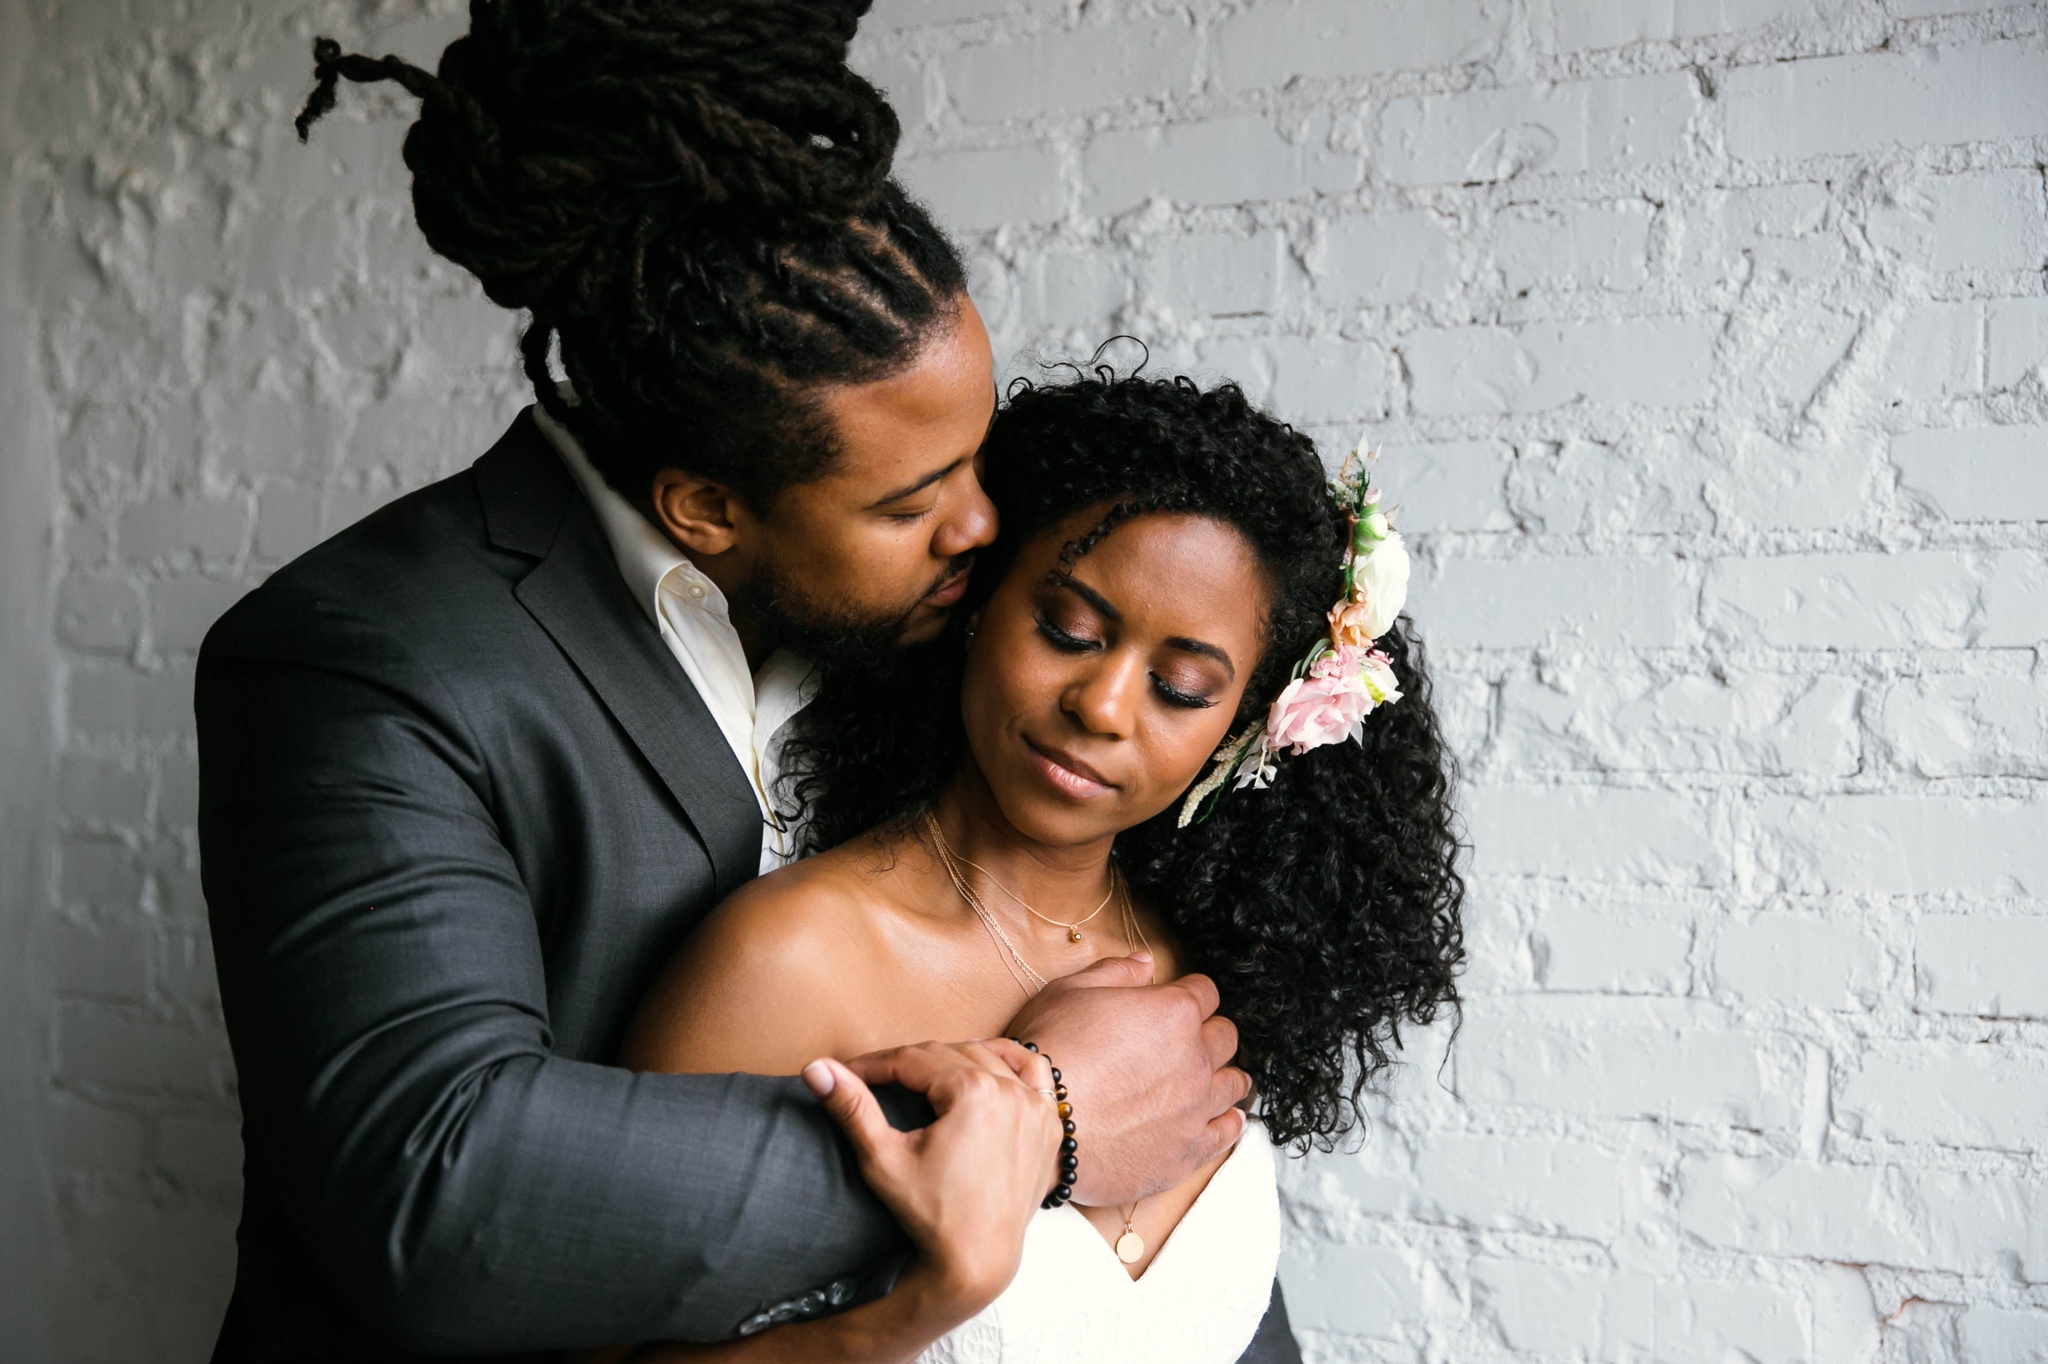 Natural light Indoor Portrait by a window of Bride and Groom - Black Love boho tropical wedding inspiration by Honolulu, Oahu, Hawaii Photographer - African American Couple